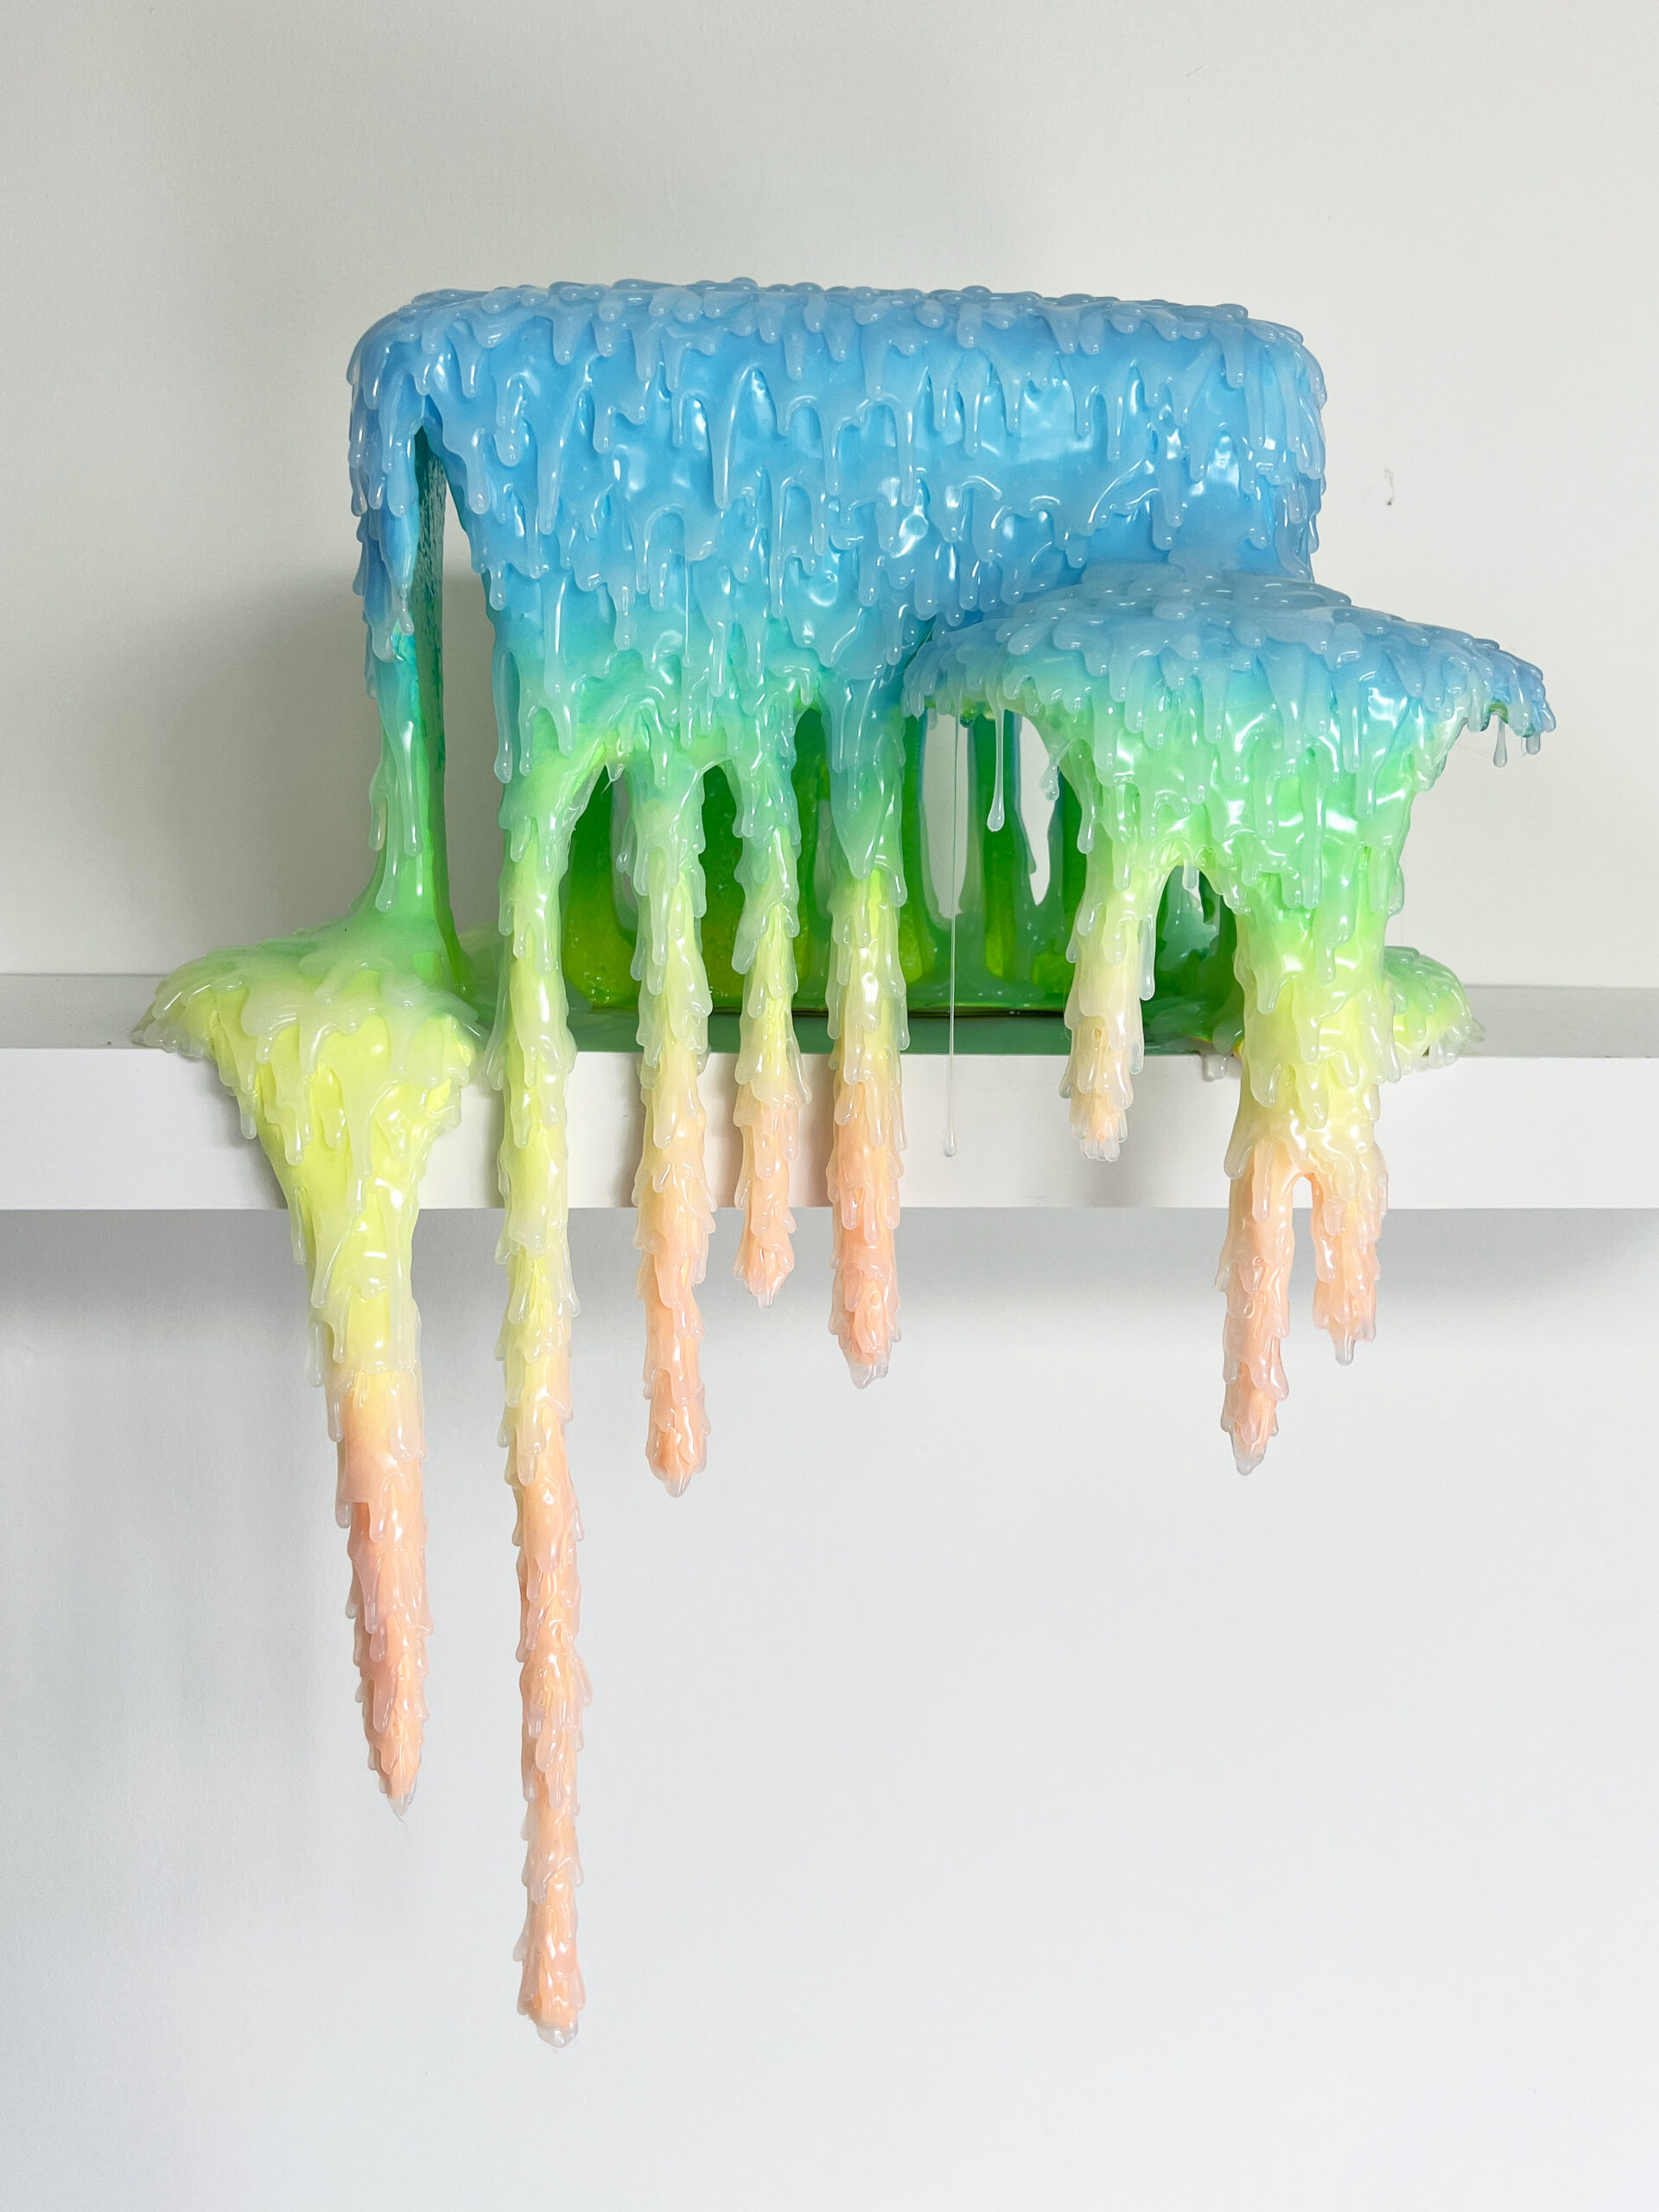 An abstract and colorful sculpture in resin, acrylic and polyurethane foam that seems to ooze on a shelf.